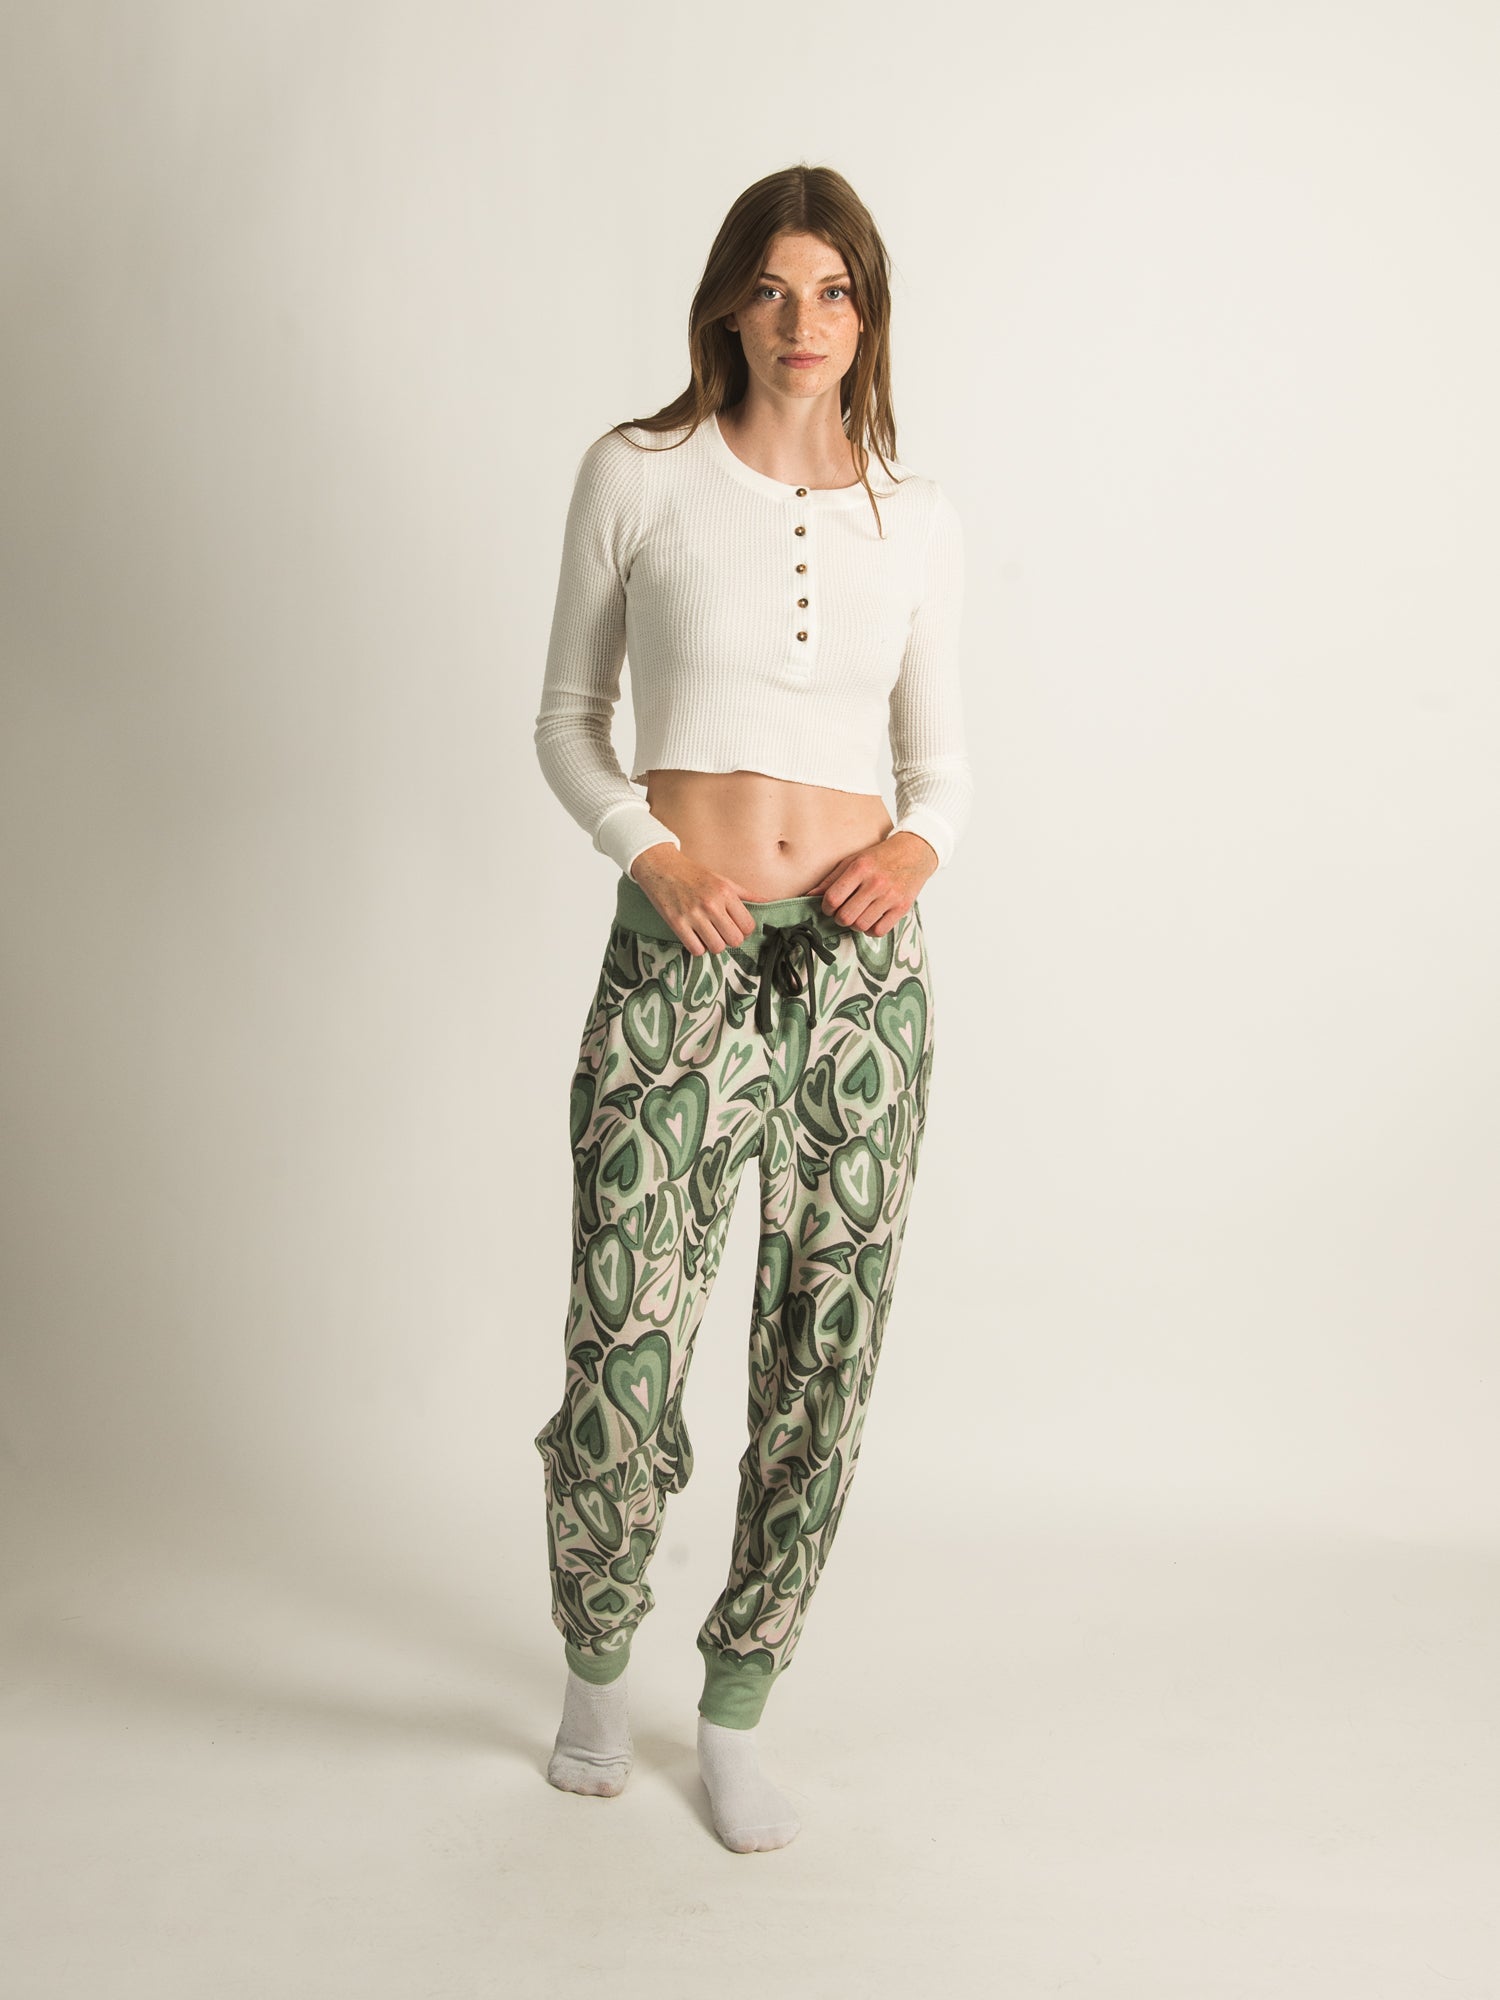 HARLOW HIGH RISE FLARE CHECK PANTS - CLEARANCE